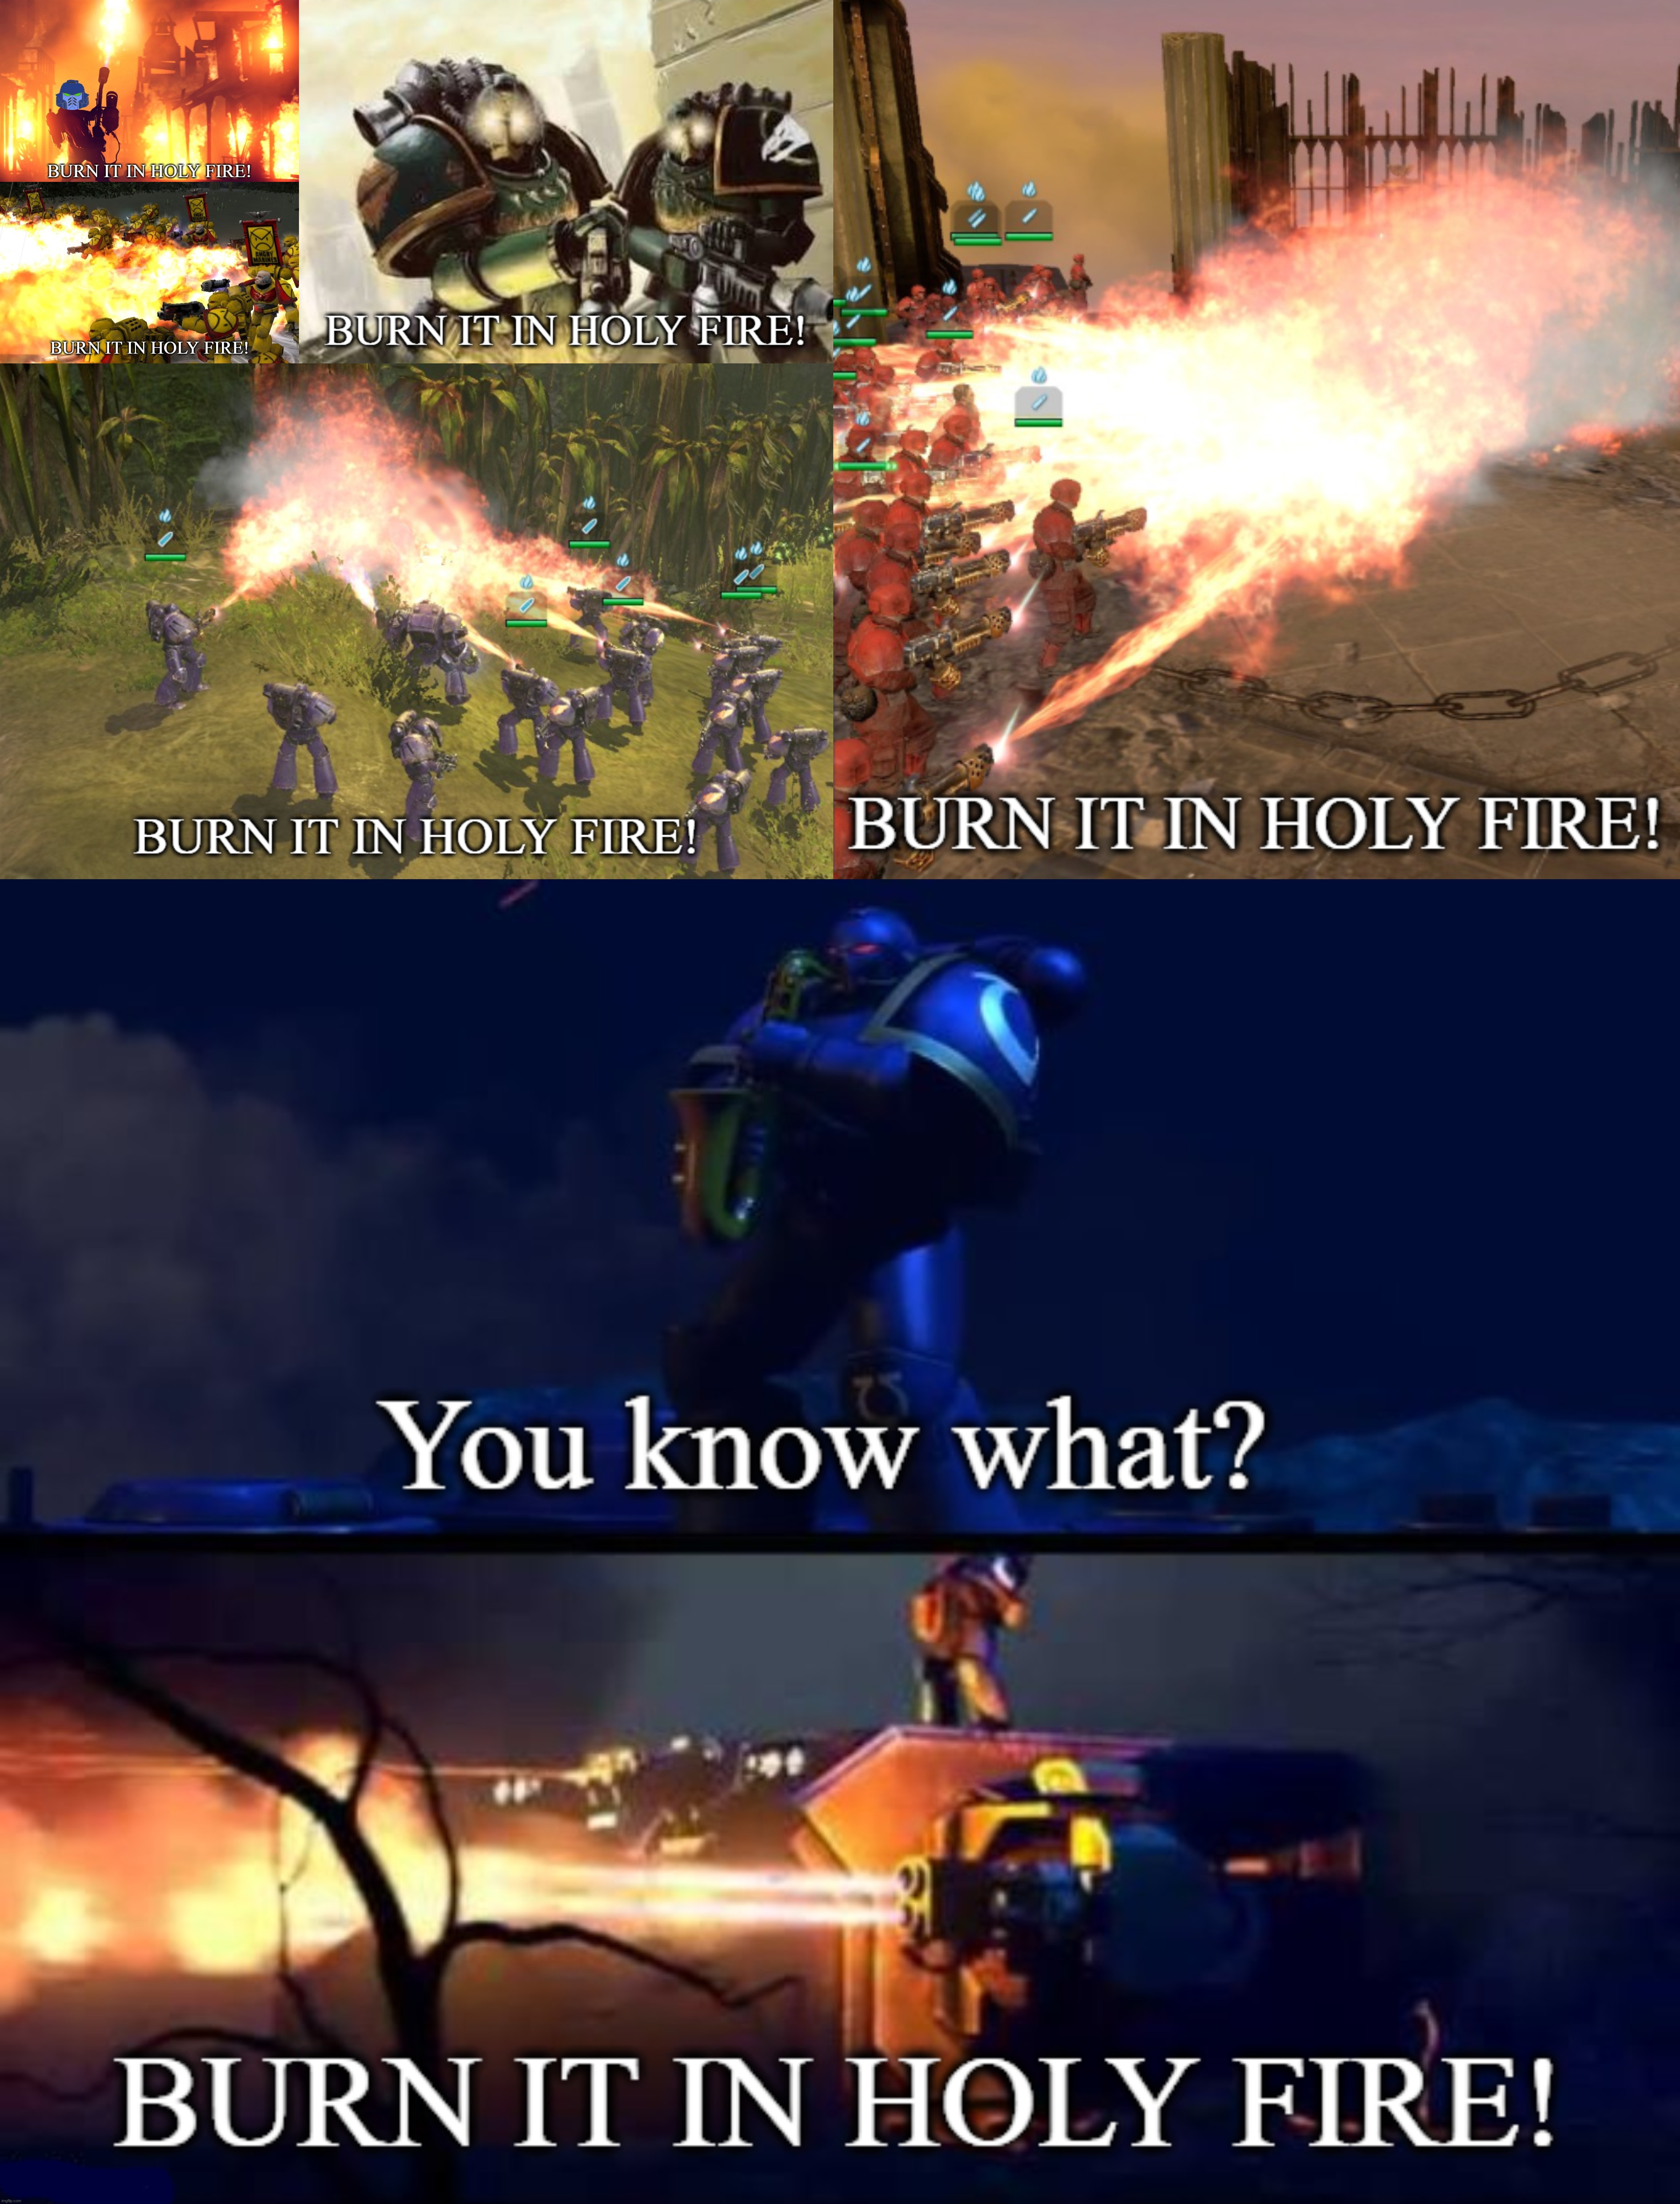 image tagged in burn it in holy fire 1,burn it in holy fire 2,burn it in holy fire 3,burn it in holy fire 4,burn it in holy fire 5 | made w/ Imgflip meme maker